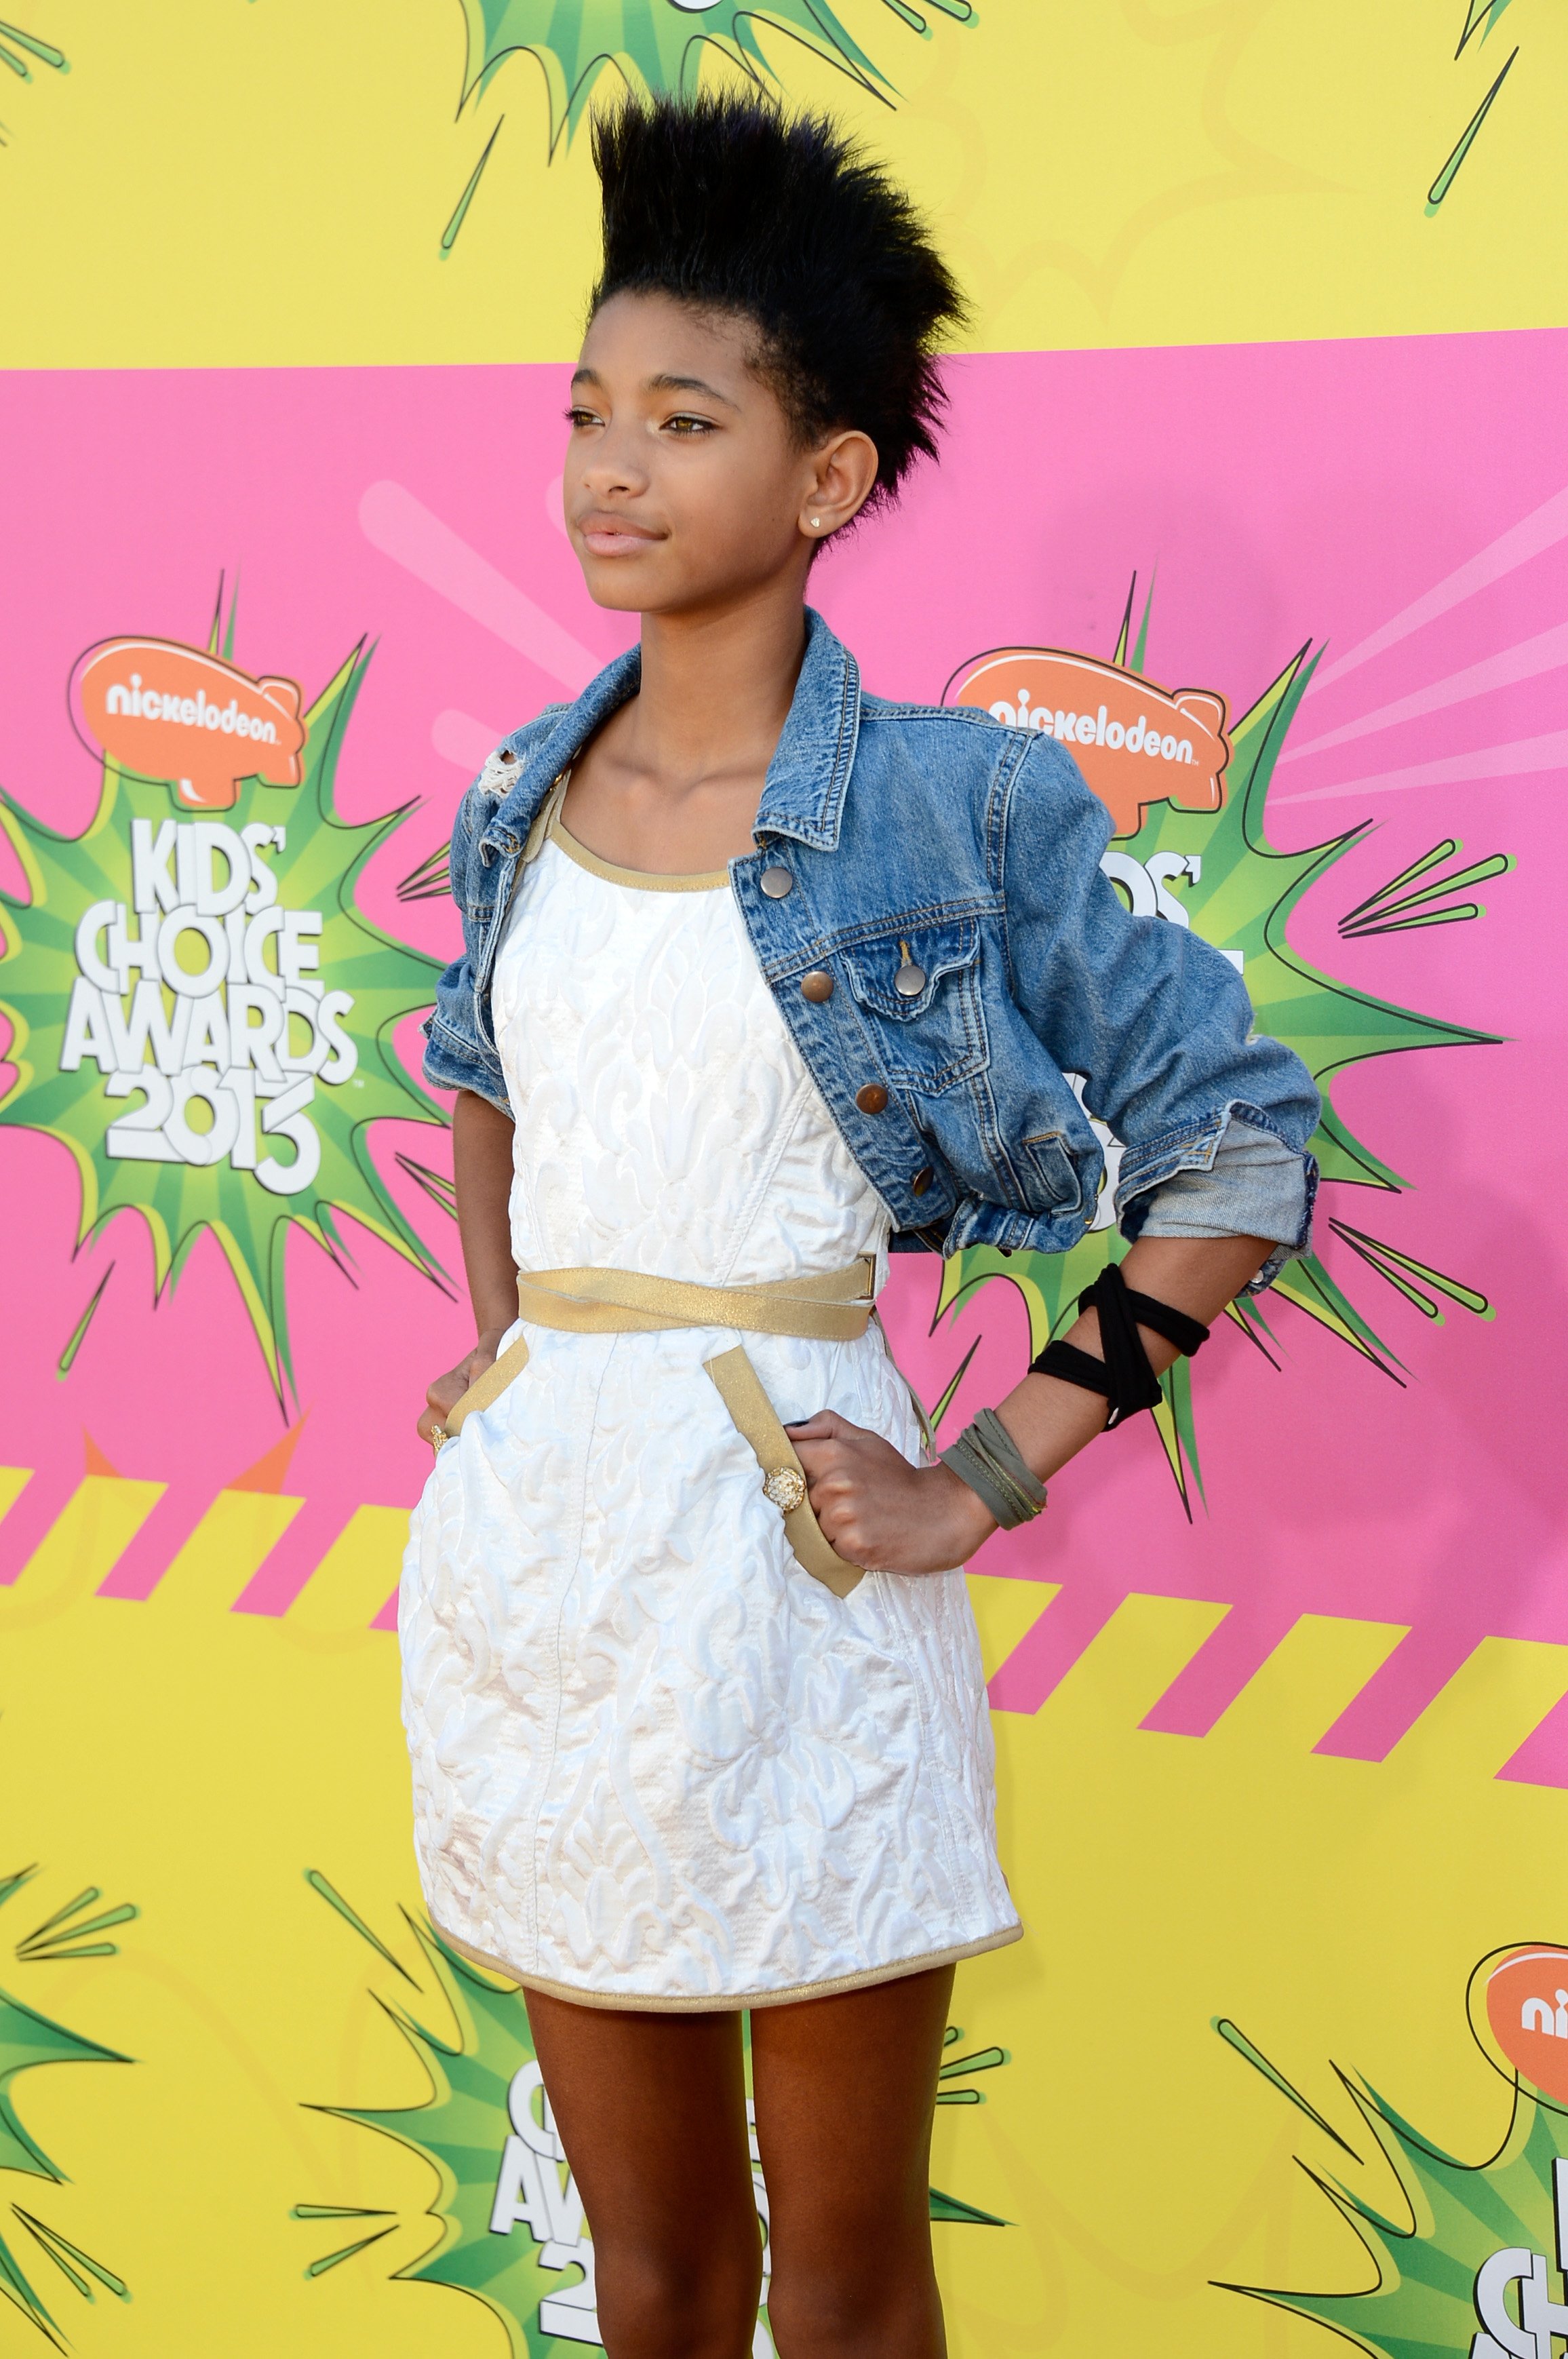 Willow Smith at the 2008 Kid's Choice Awards | Photo: Getty Images